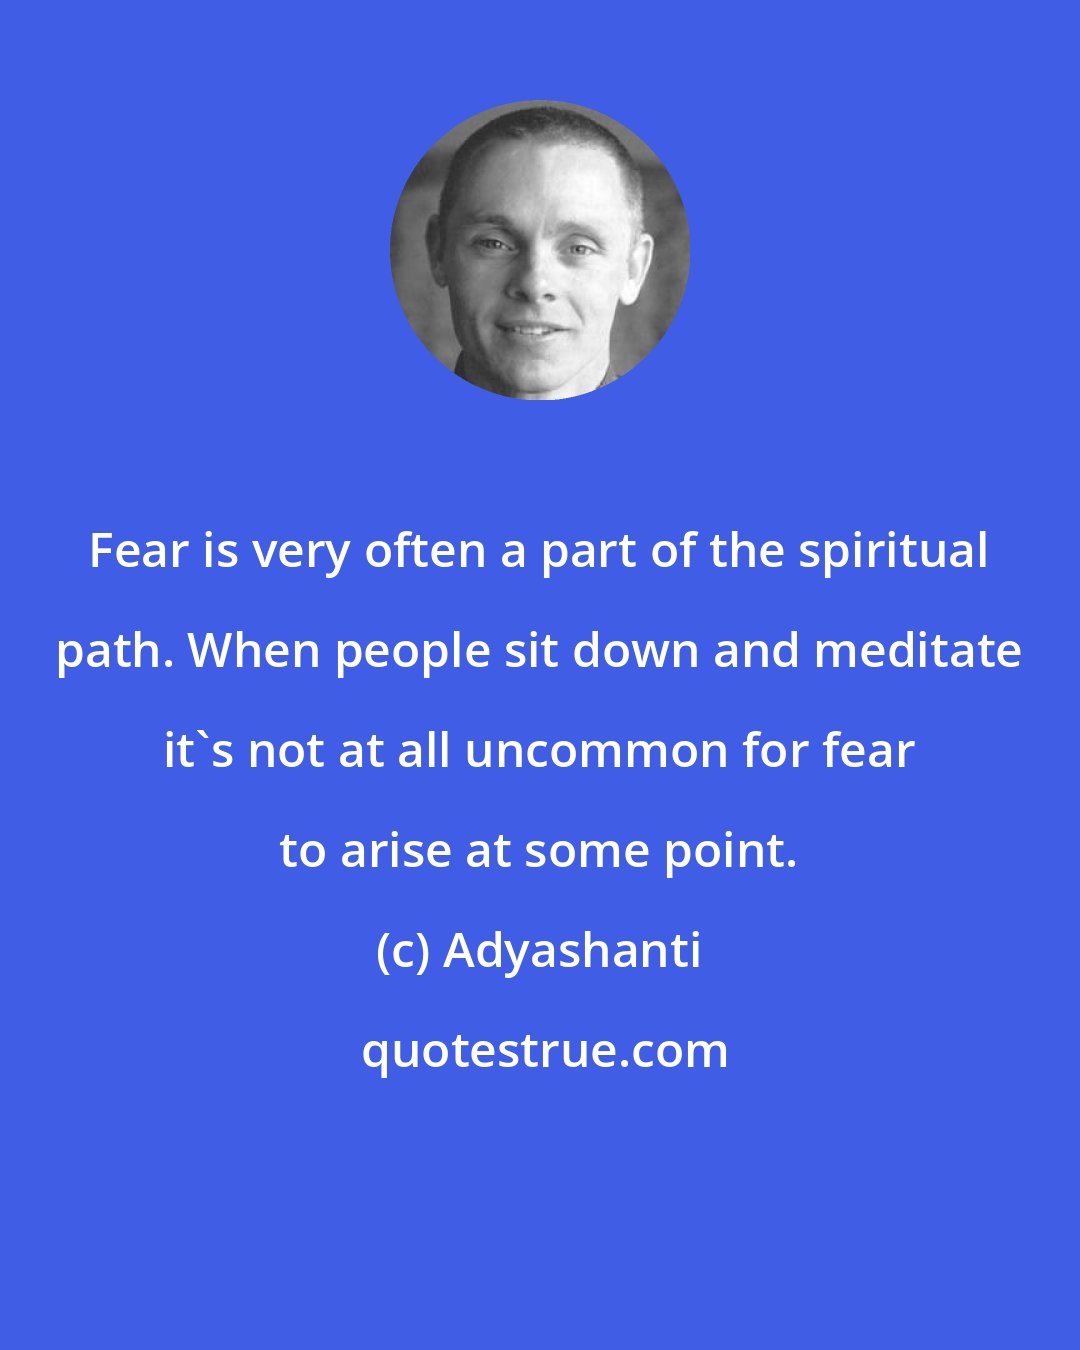 Adyashanti: Fear is very often a part of the spiritual path. When people sit down and meditate it's not at all uncommon for fear to arise at some point.